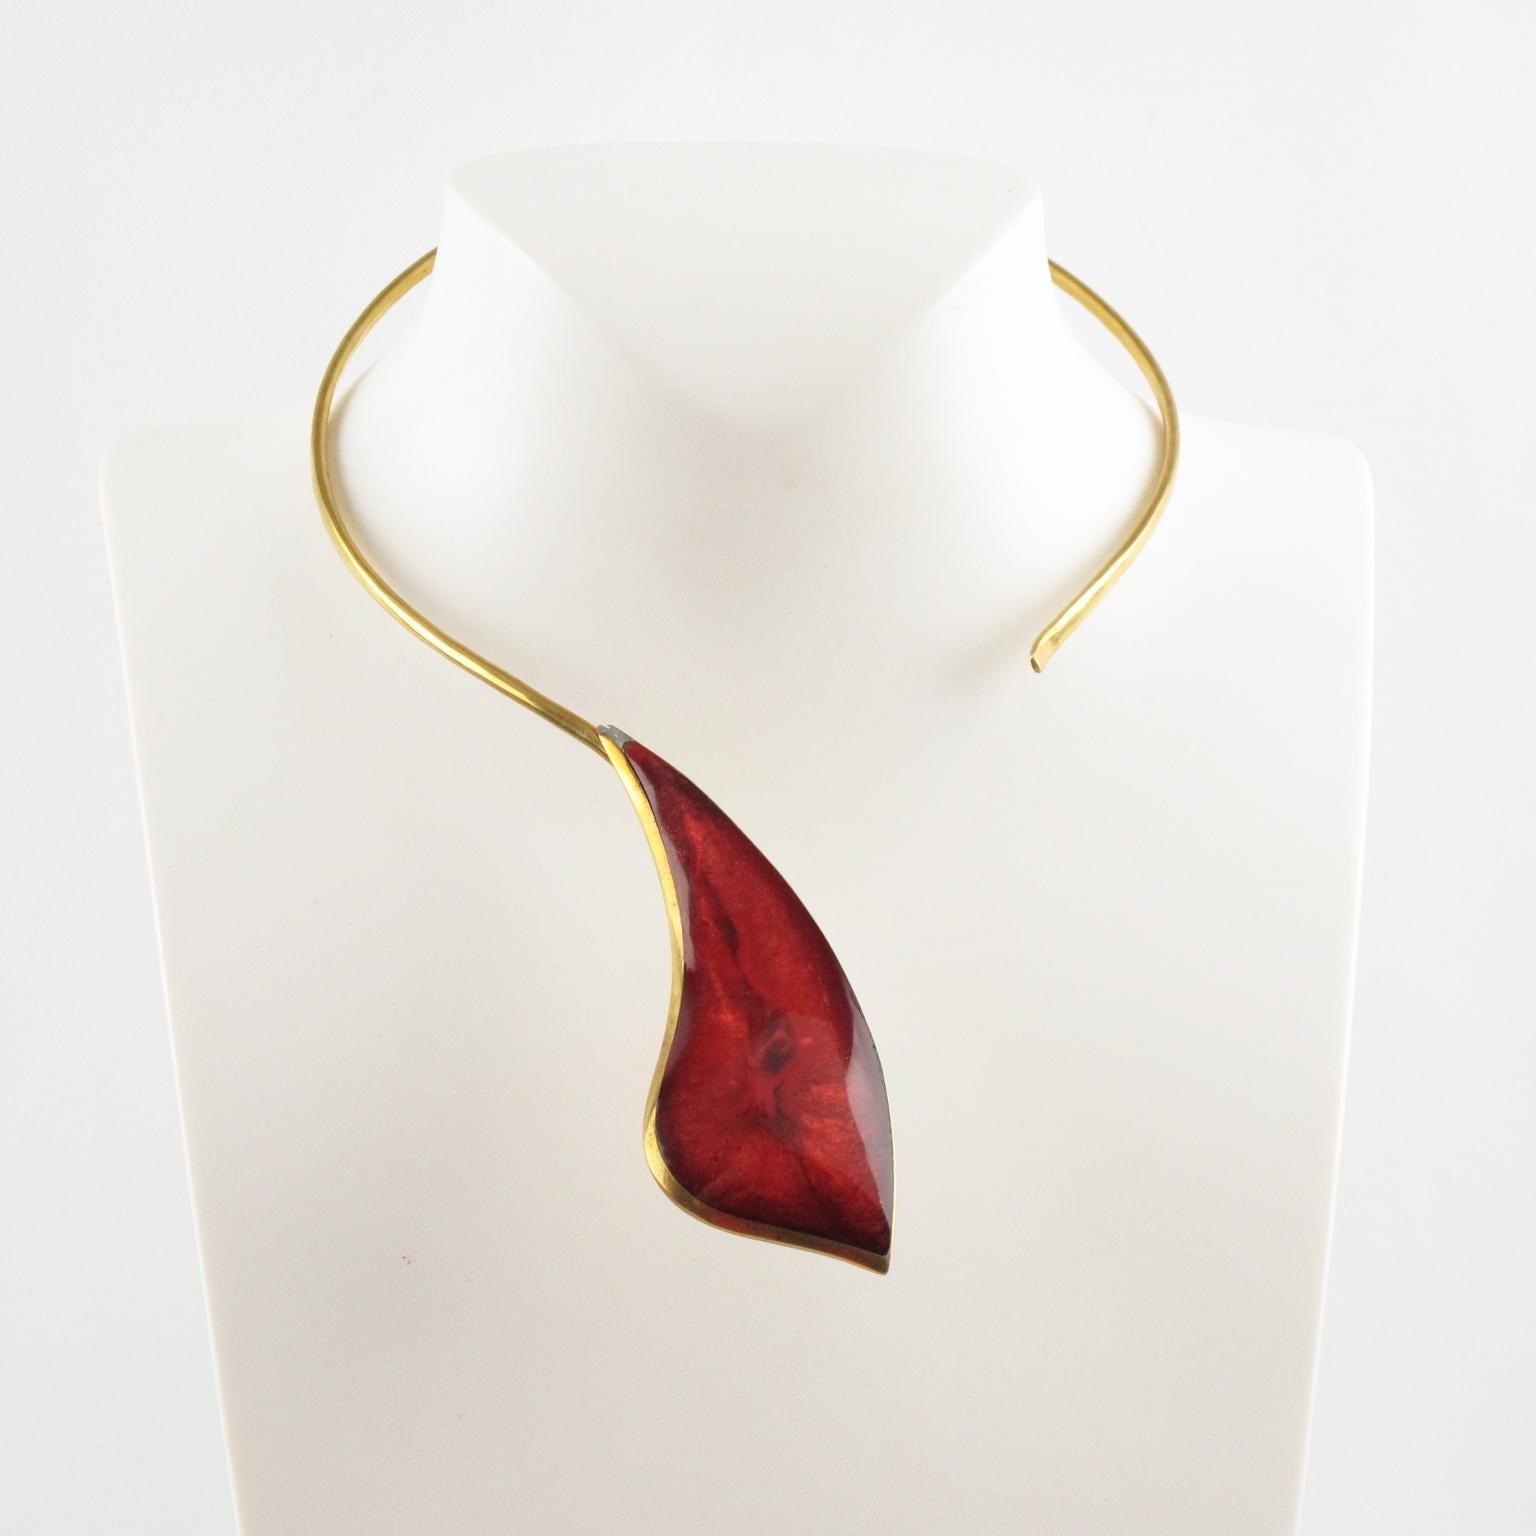 Modernist Space Age Brass and Red Resin Drop Necklace